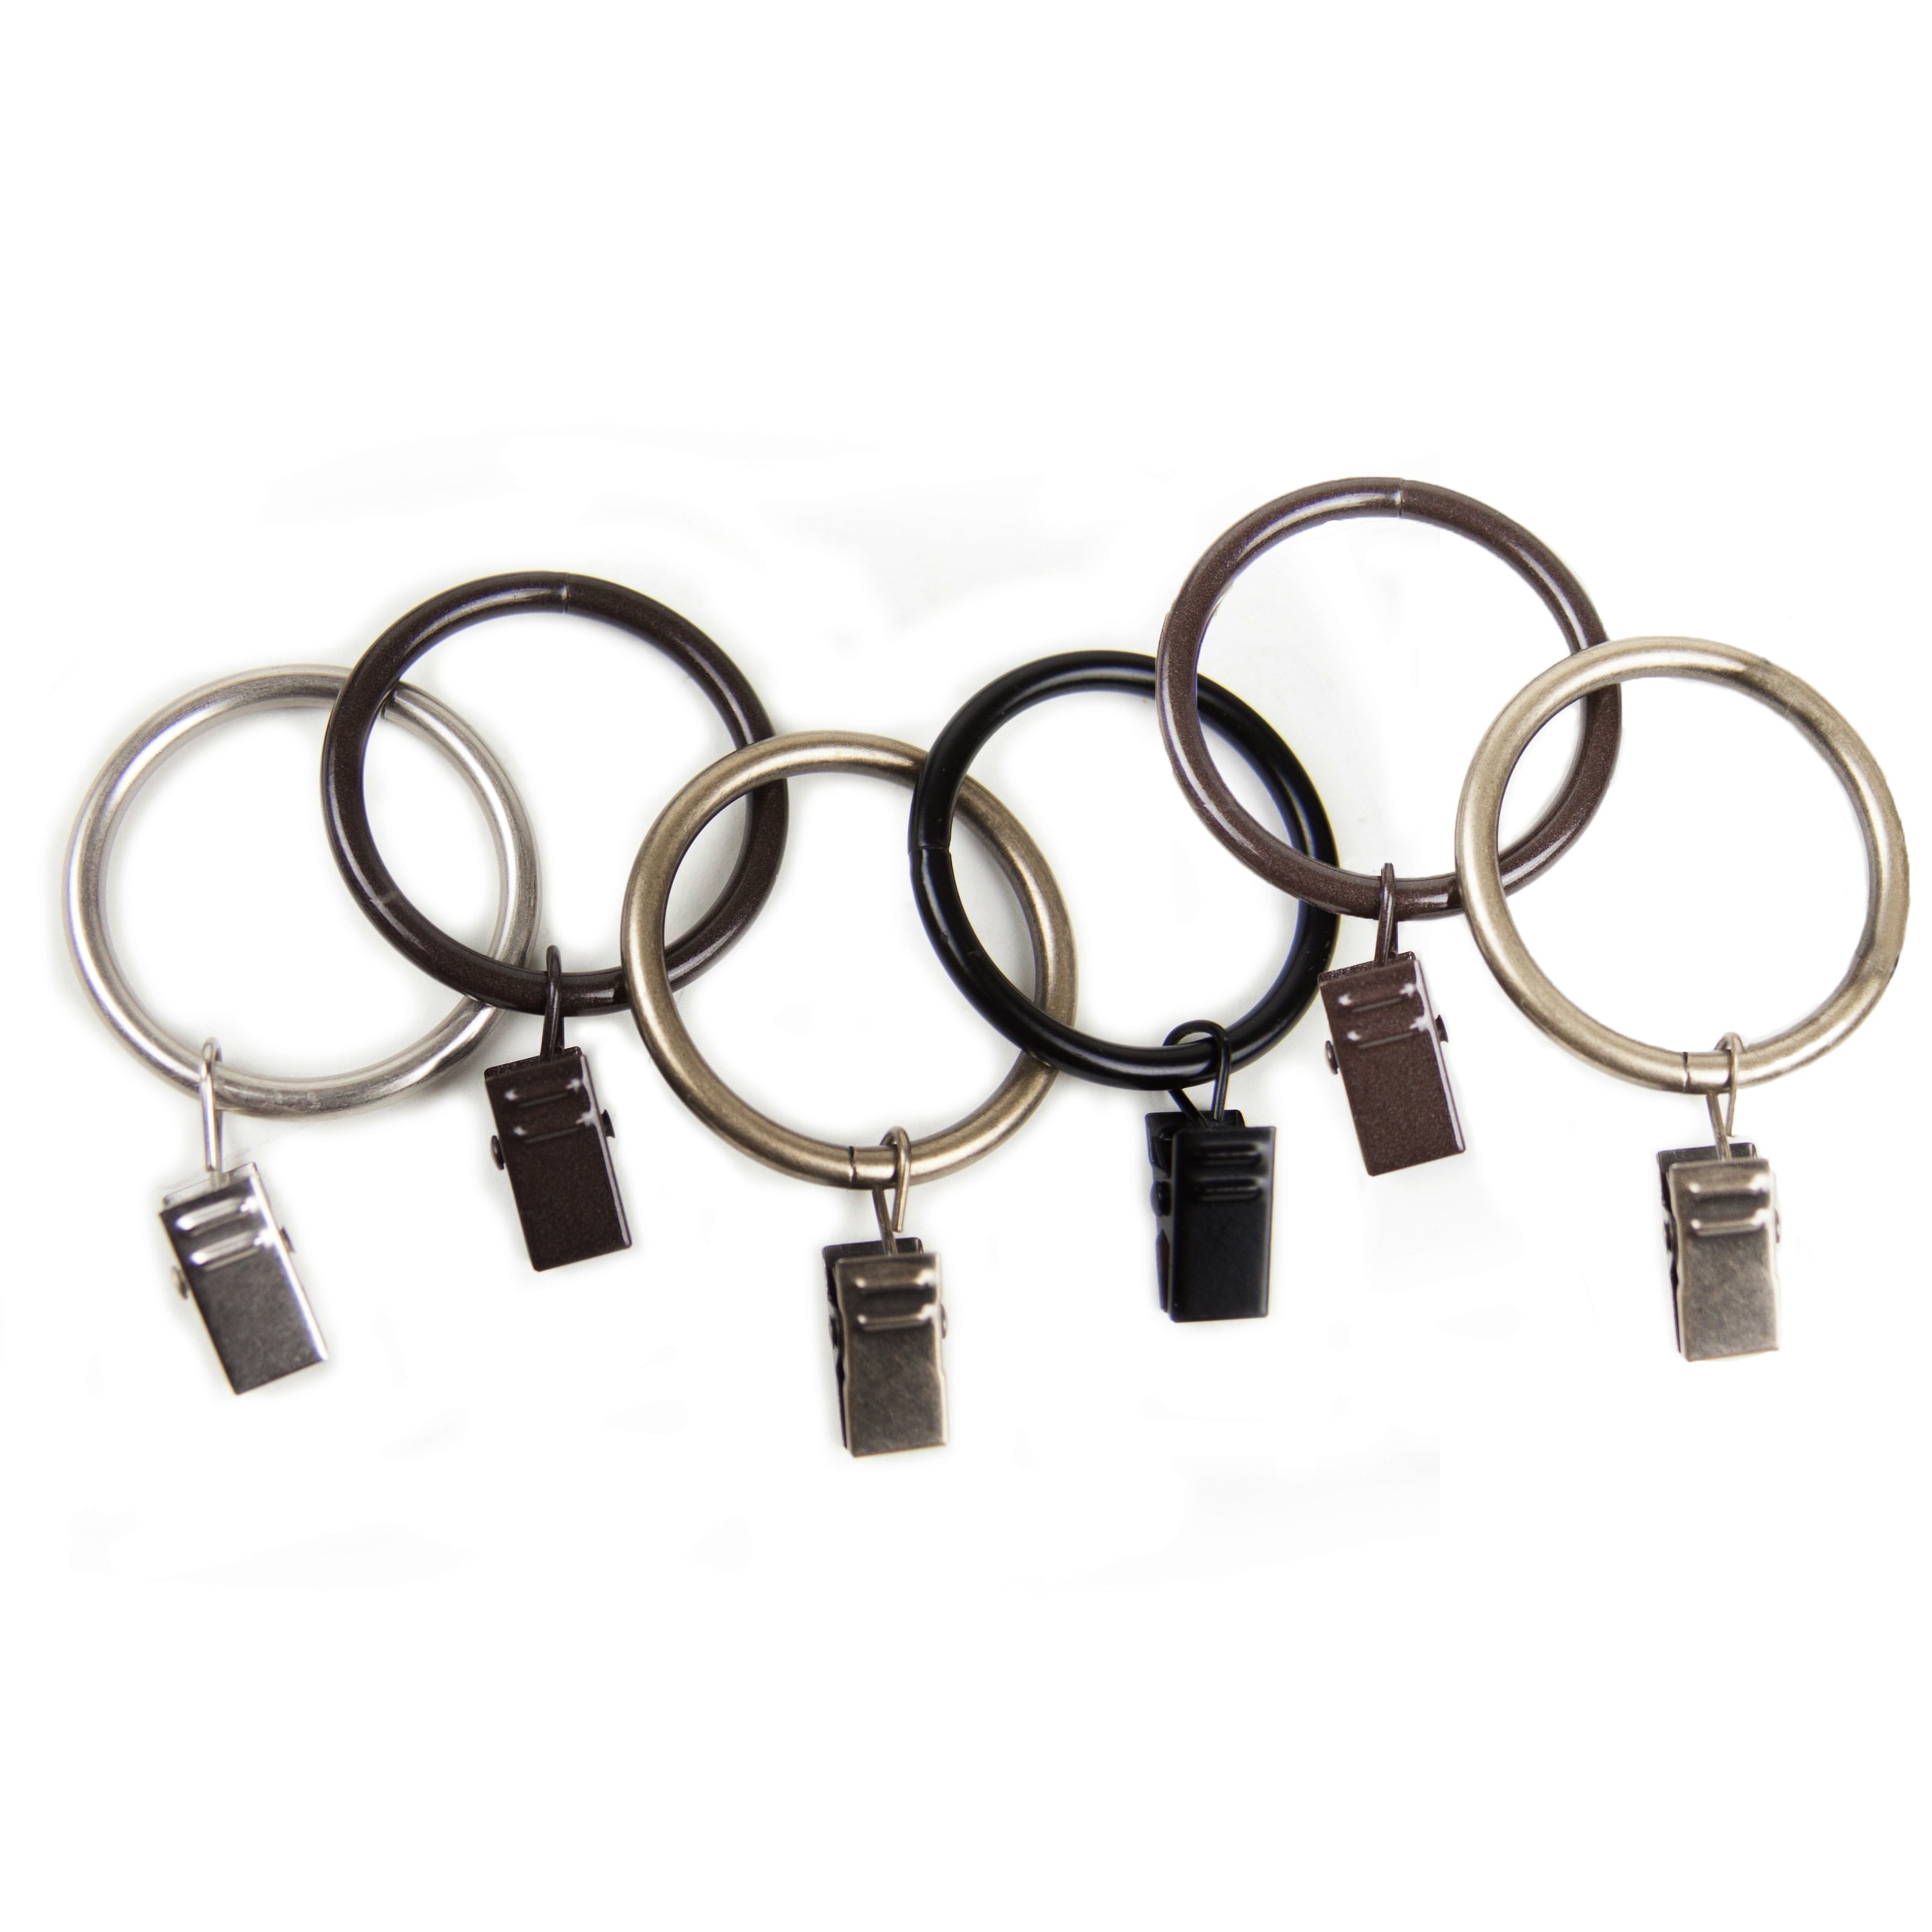 Urbanest Set of 20 1-inch Metal Curtain Rings with Clips and Eyelets, Fits  up to 3/4 Inch Rod, Bronze - Walmart.com